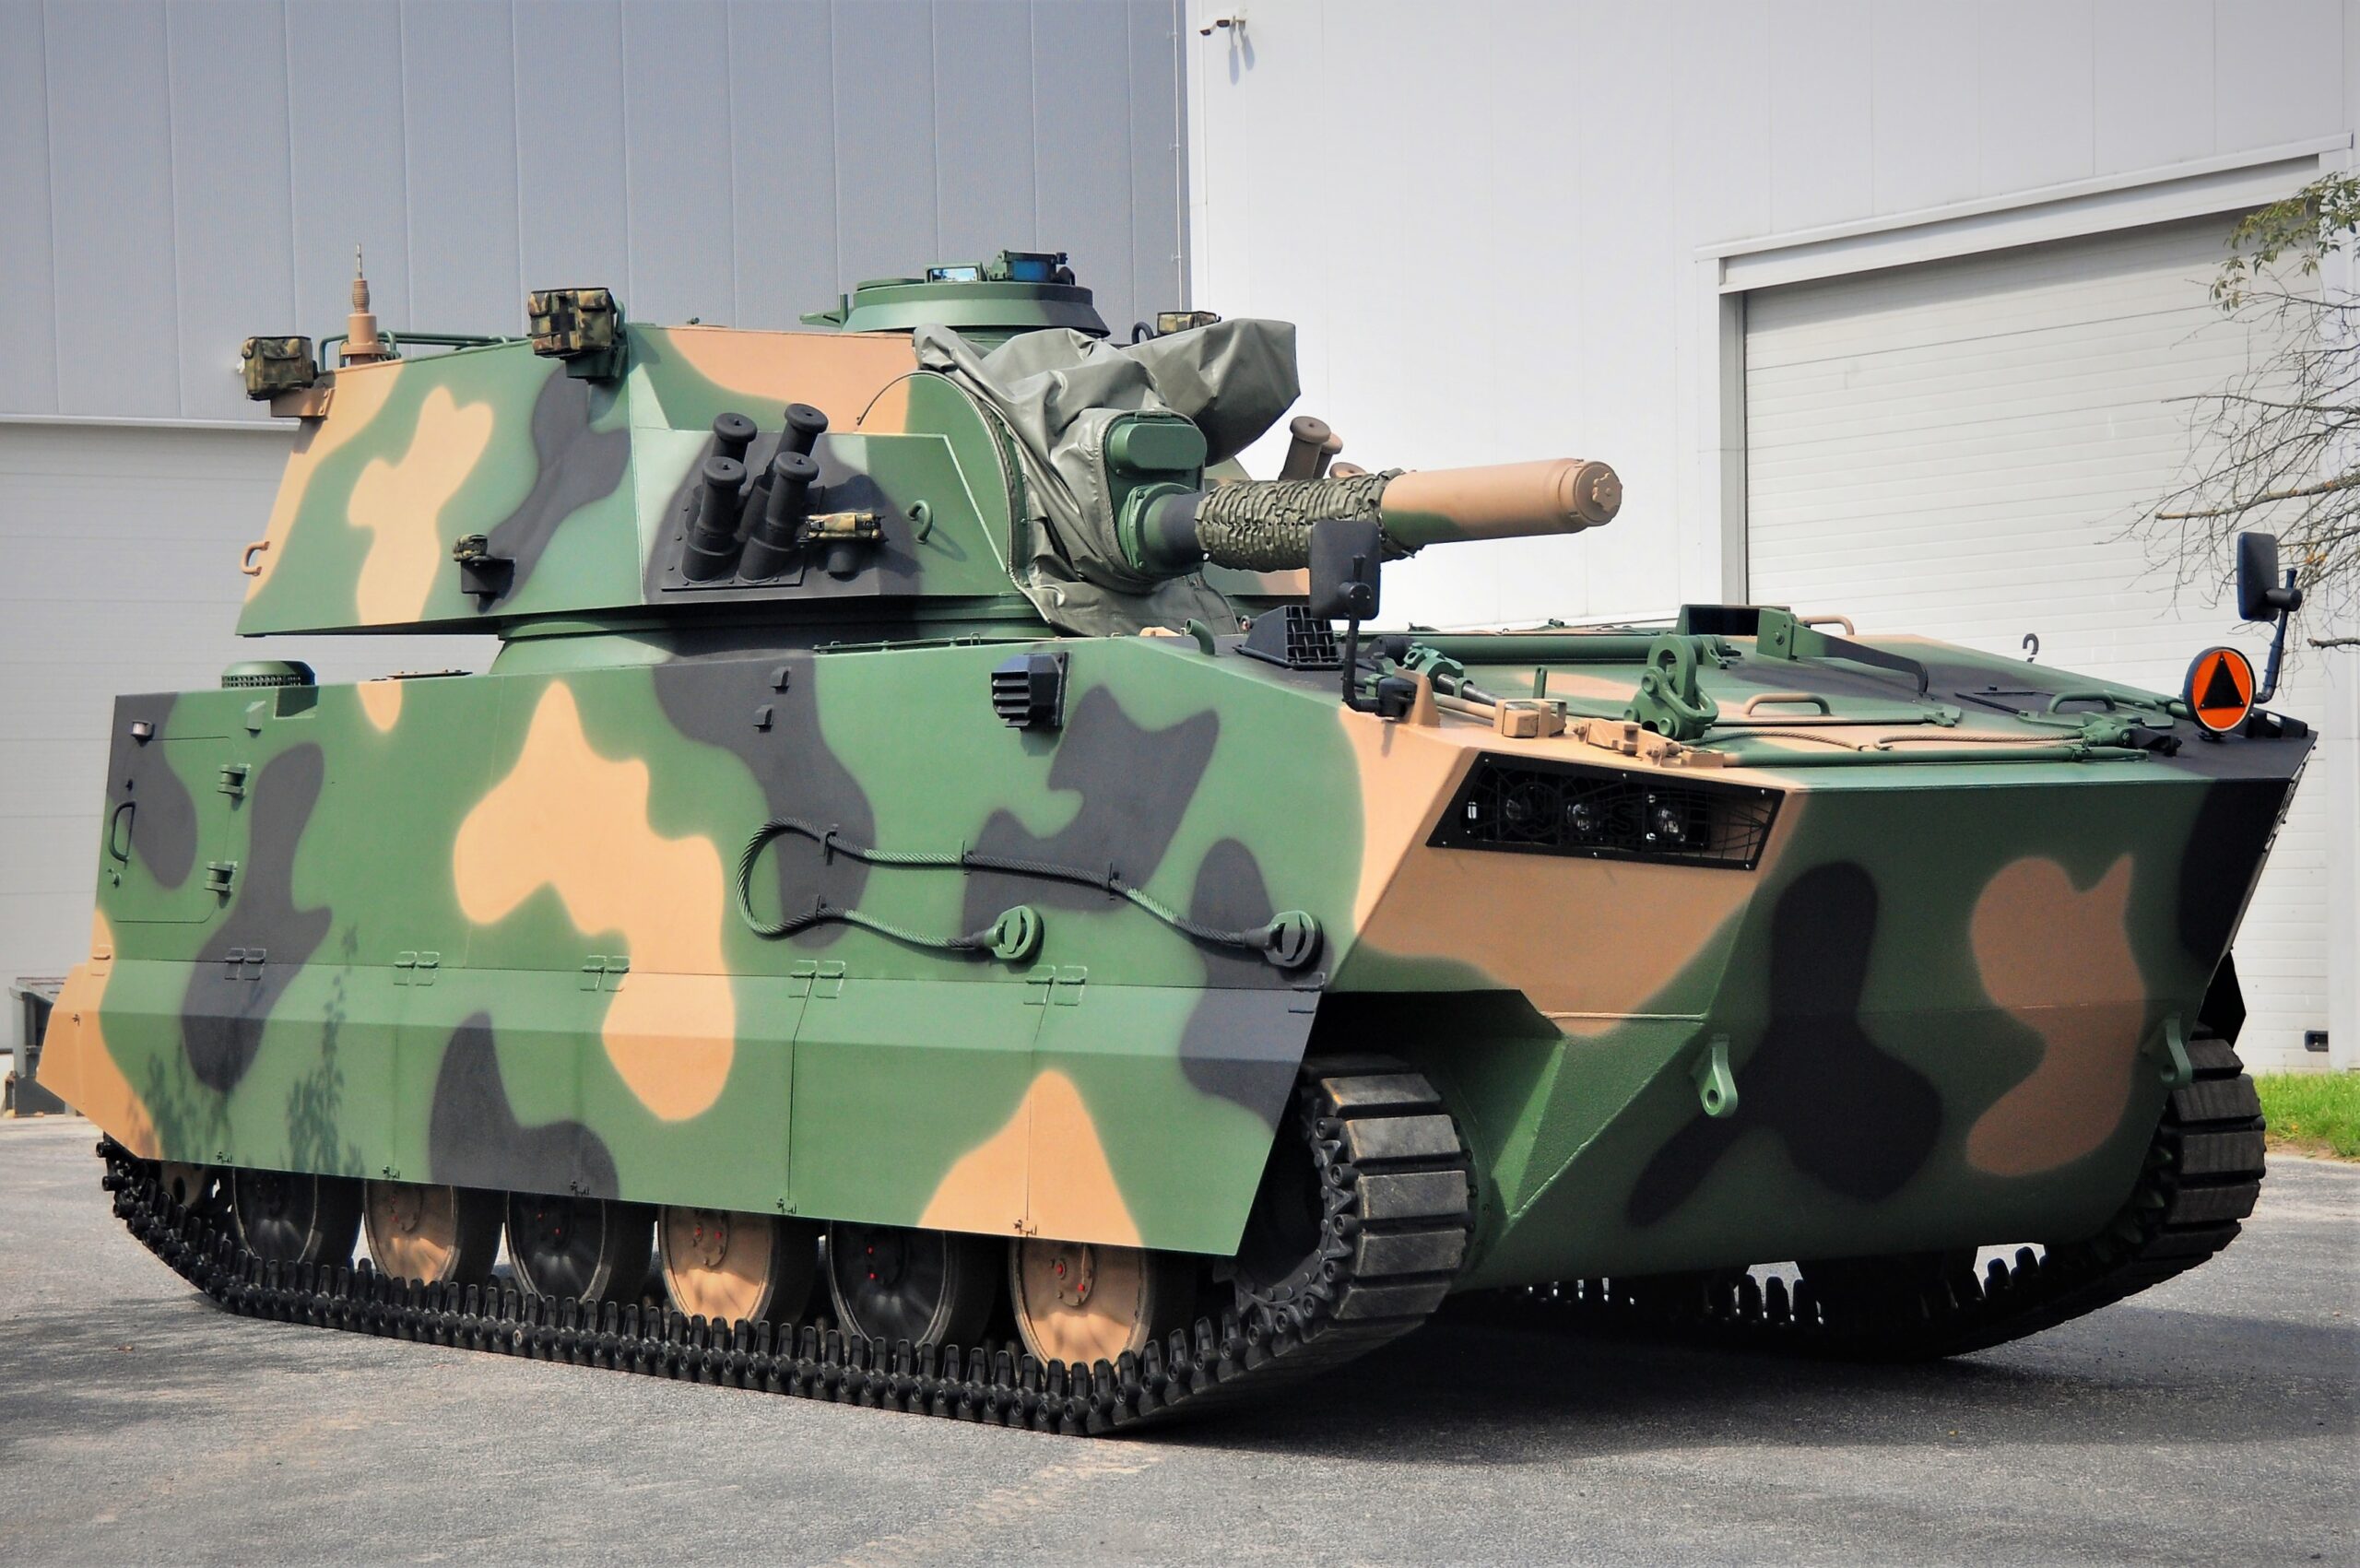 Poland’s Self-Propelled Mortar Gets A Redesign